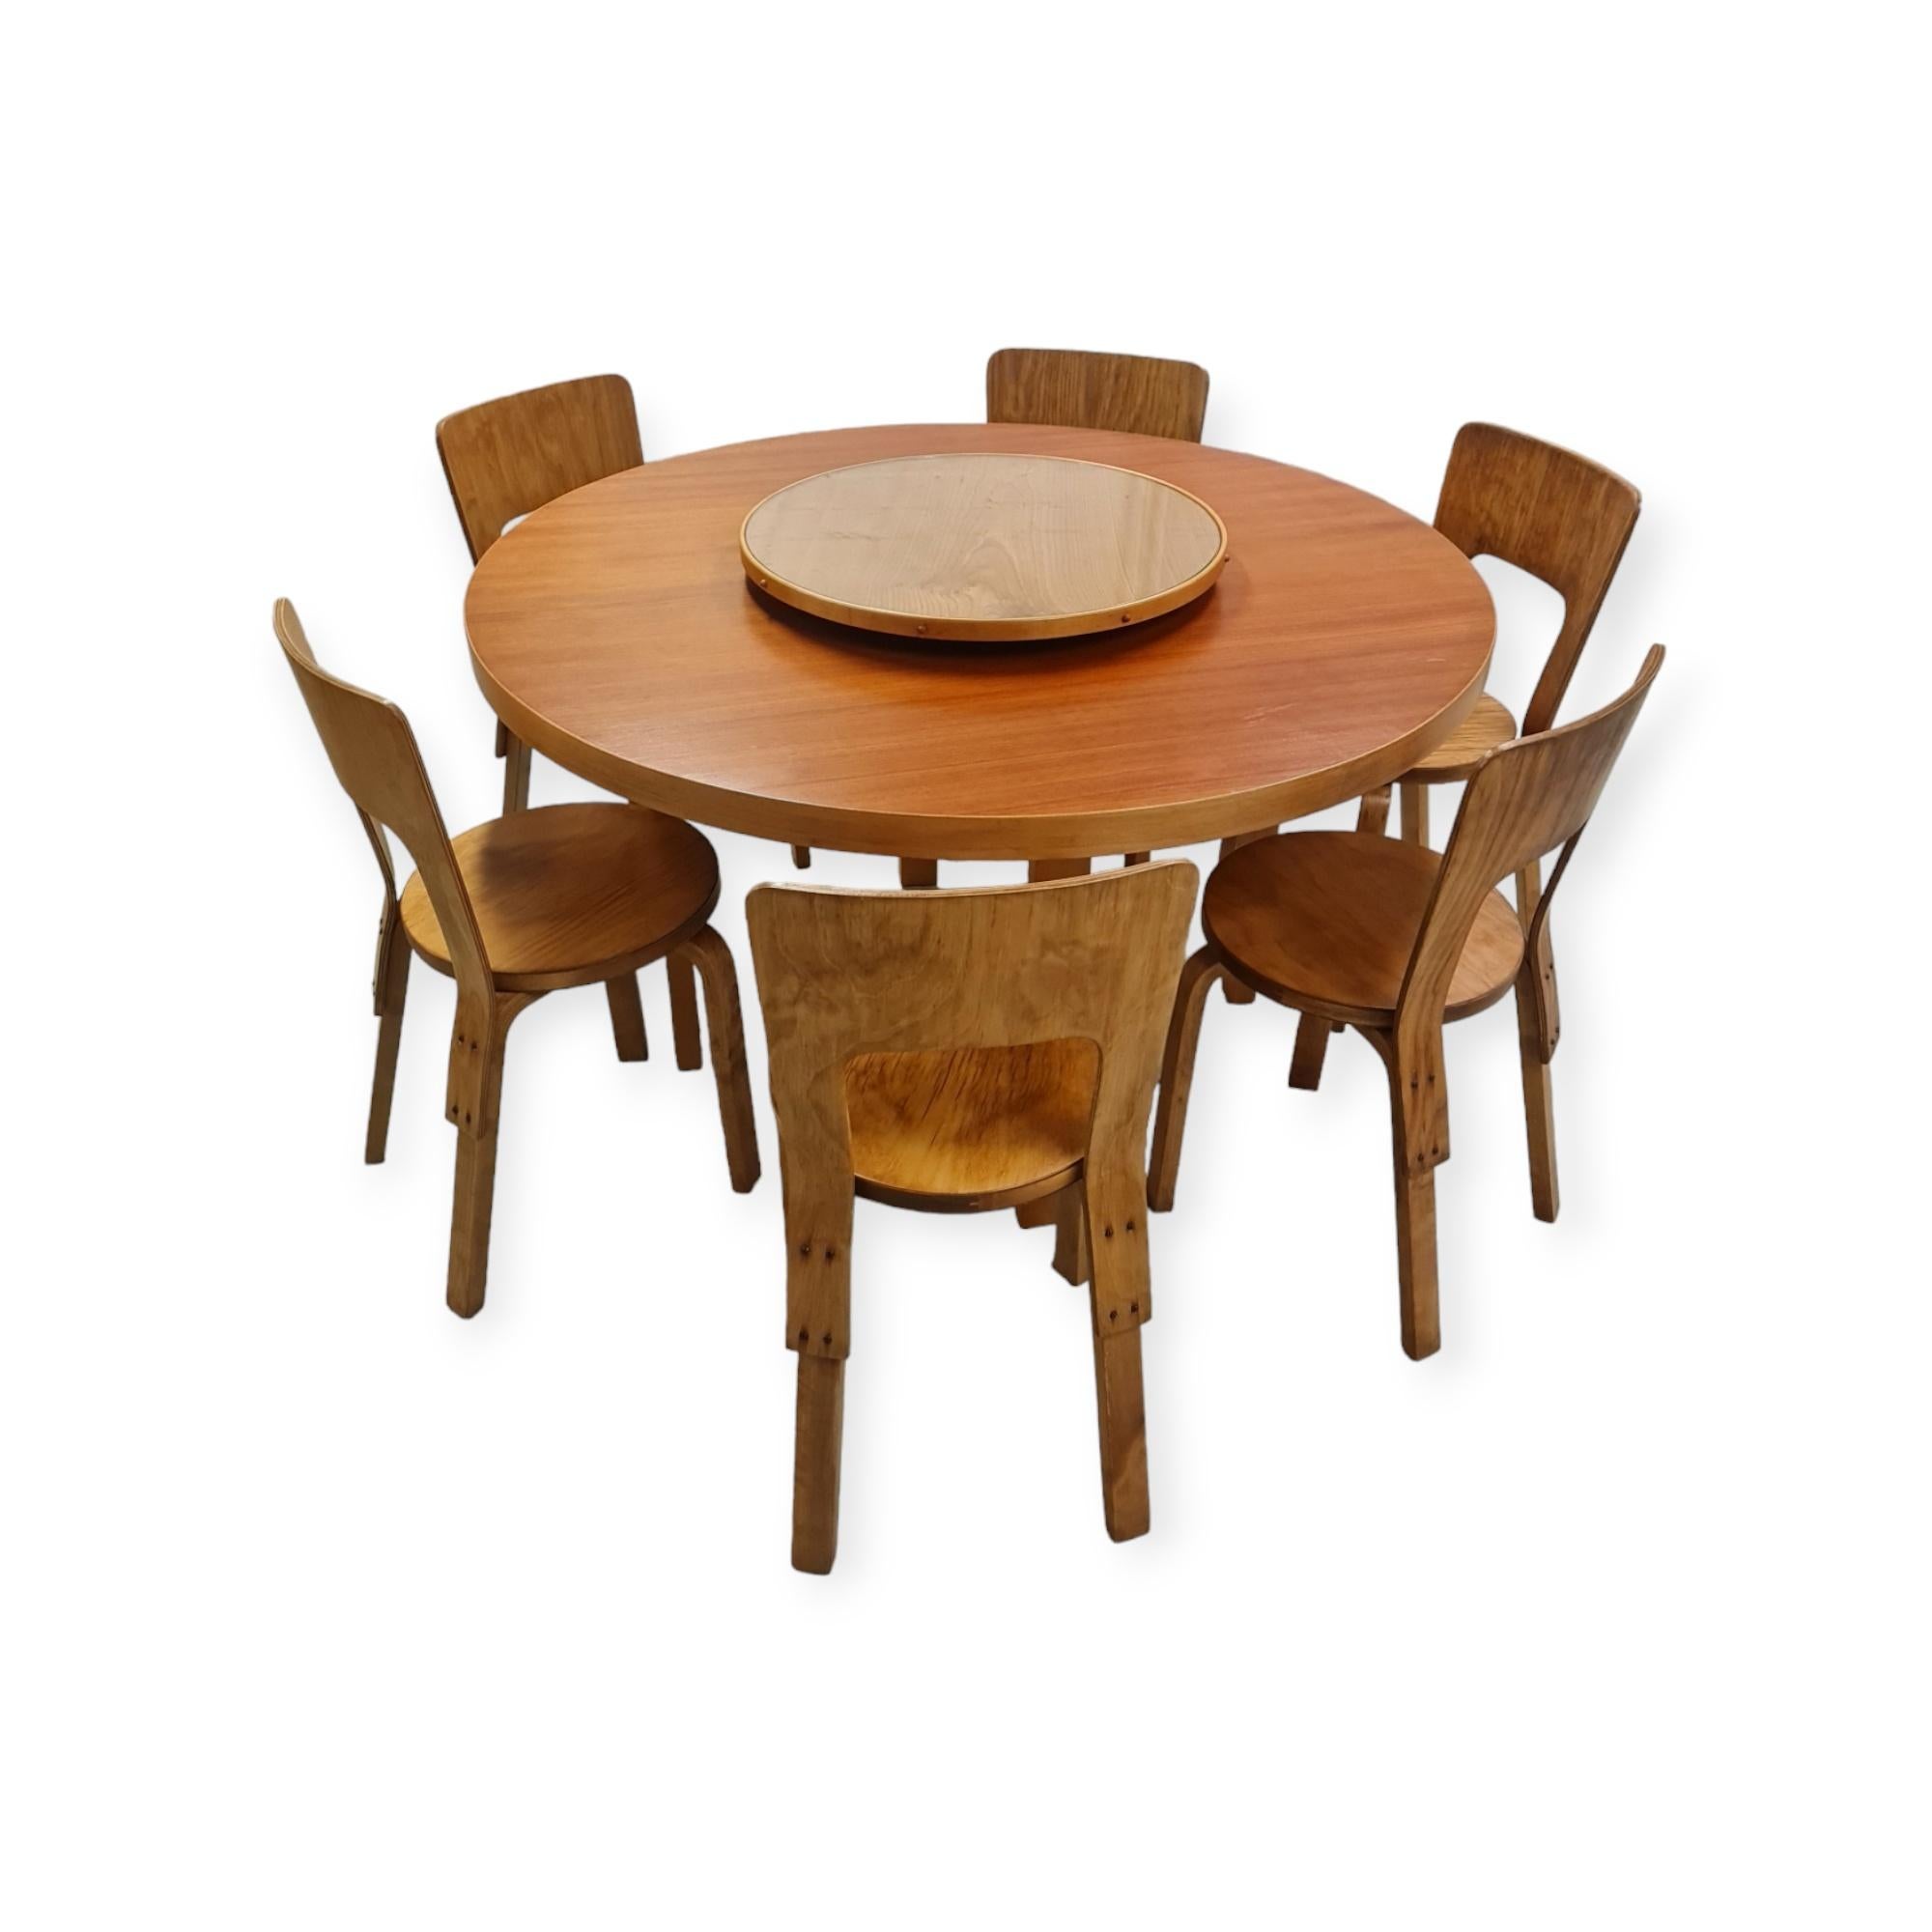 Scandinavian Modern Alvar Aalto Dining Set with Lazy Susan and 6 Model 66 chairs, 1940s For Sale